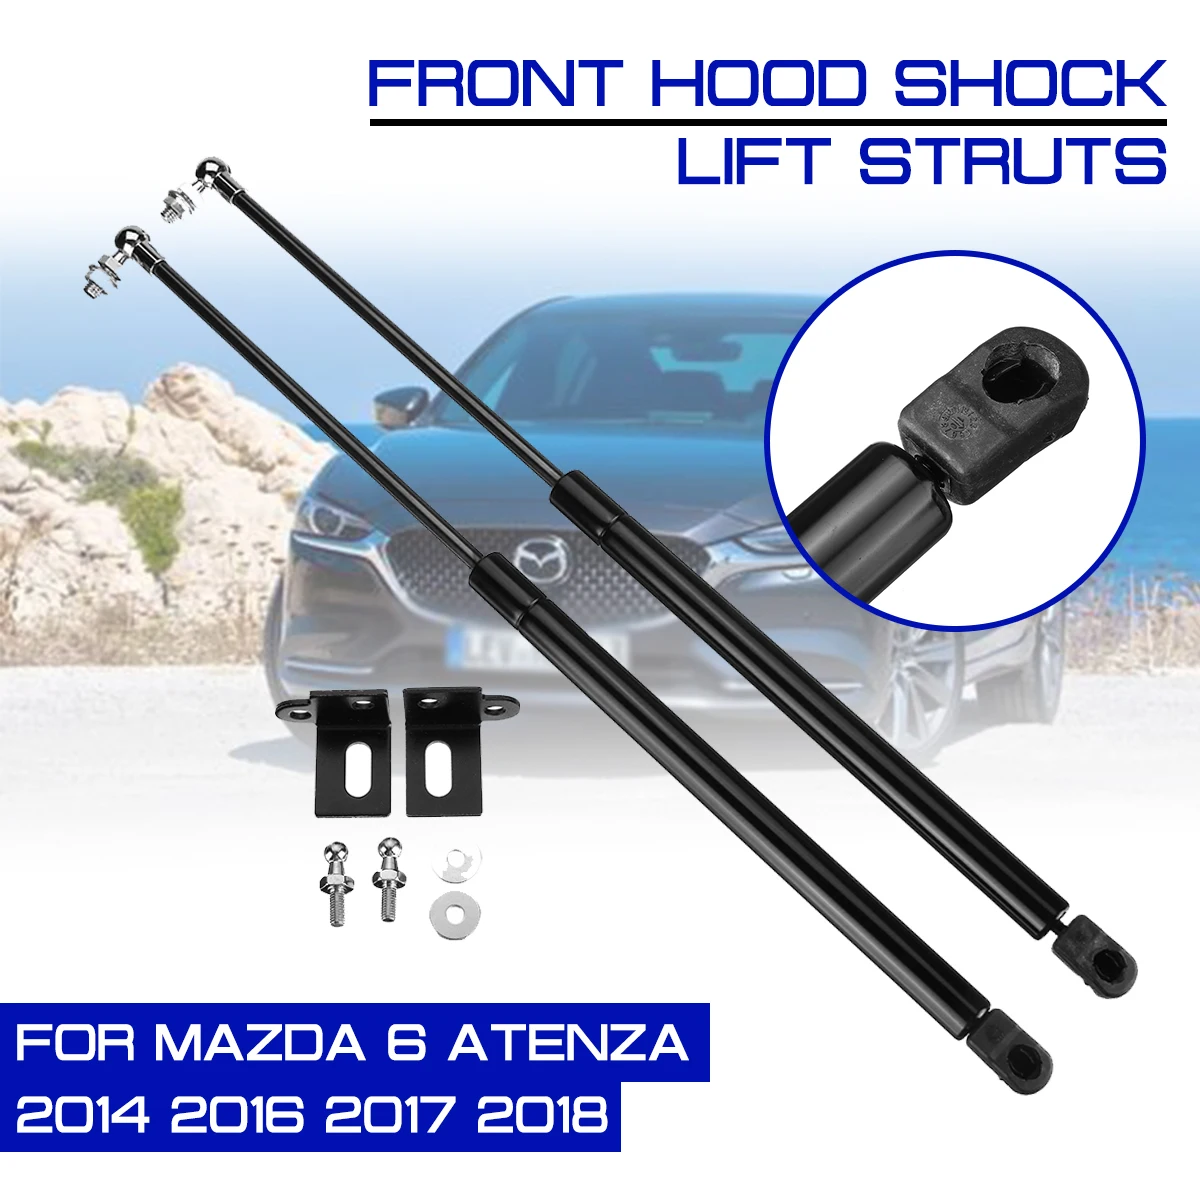 

Struts Bar Front Engine Cover Hood Shock Lift For Mazda 6 Atenza 2014 2016 2017 2018 Support Arm Rod Hydraulic Gas Spring